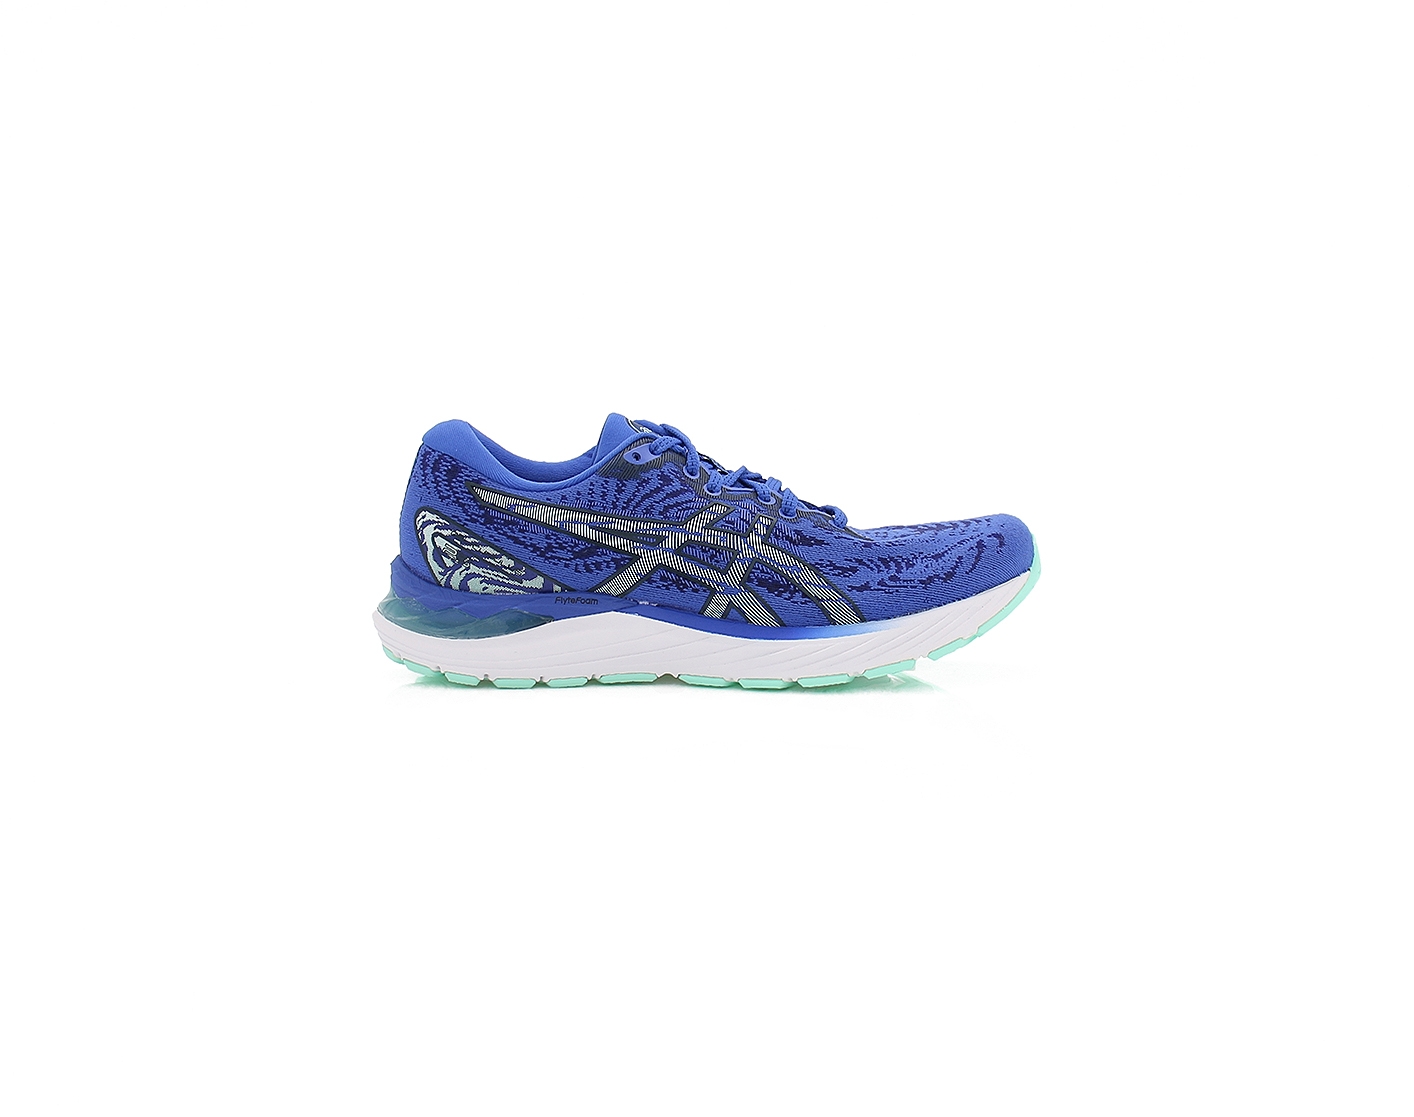 Womens Asics Gel Cumulus 23 – Track & Field Trainers – Suitable For Orthotics- Size 7.5 – Blue / Light Blue / White – Synthetic Fabric